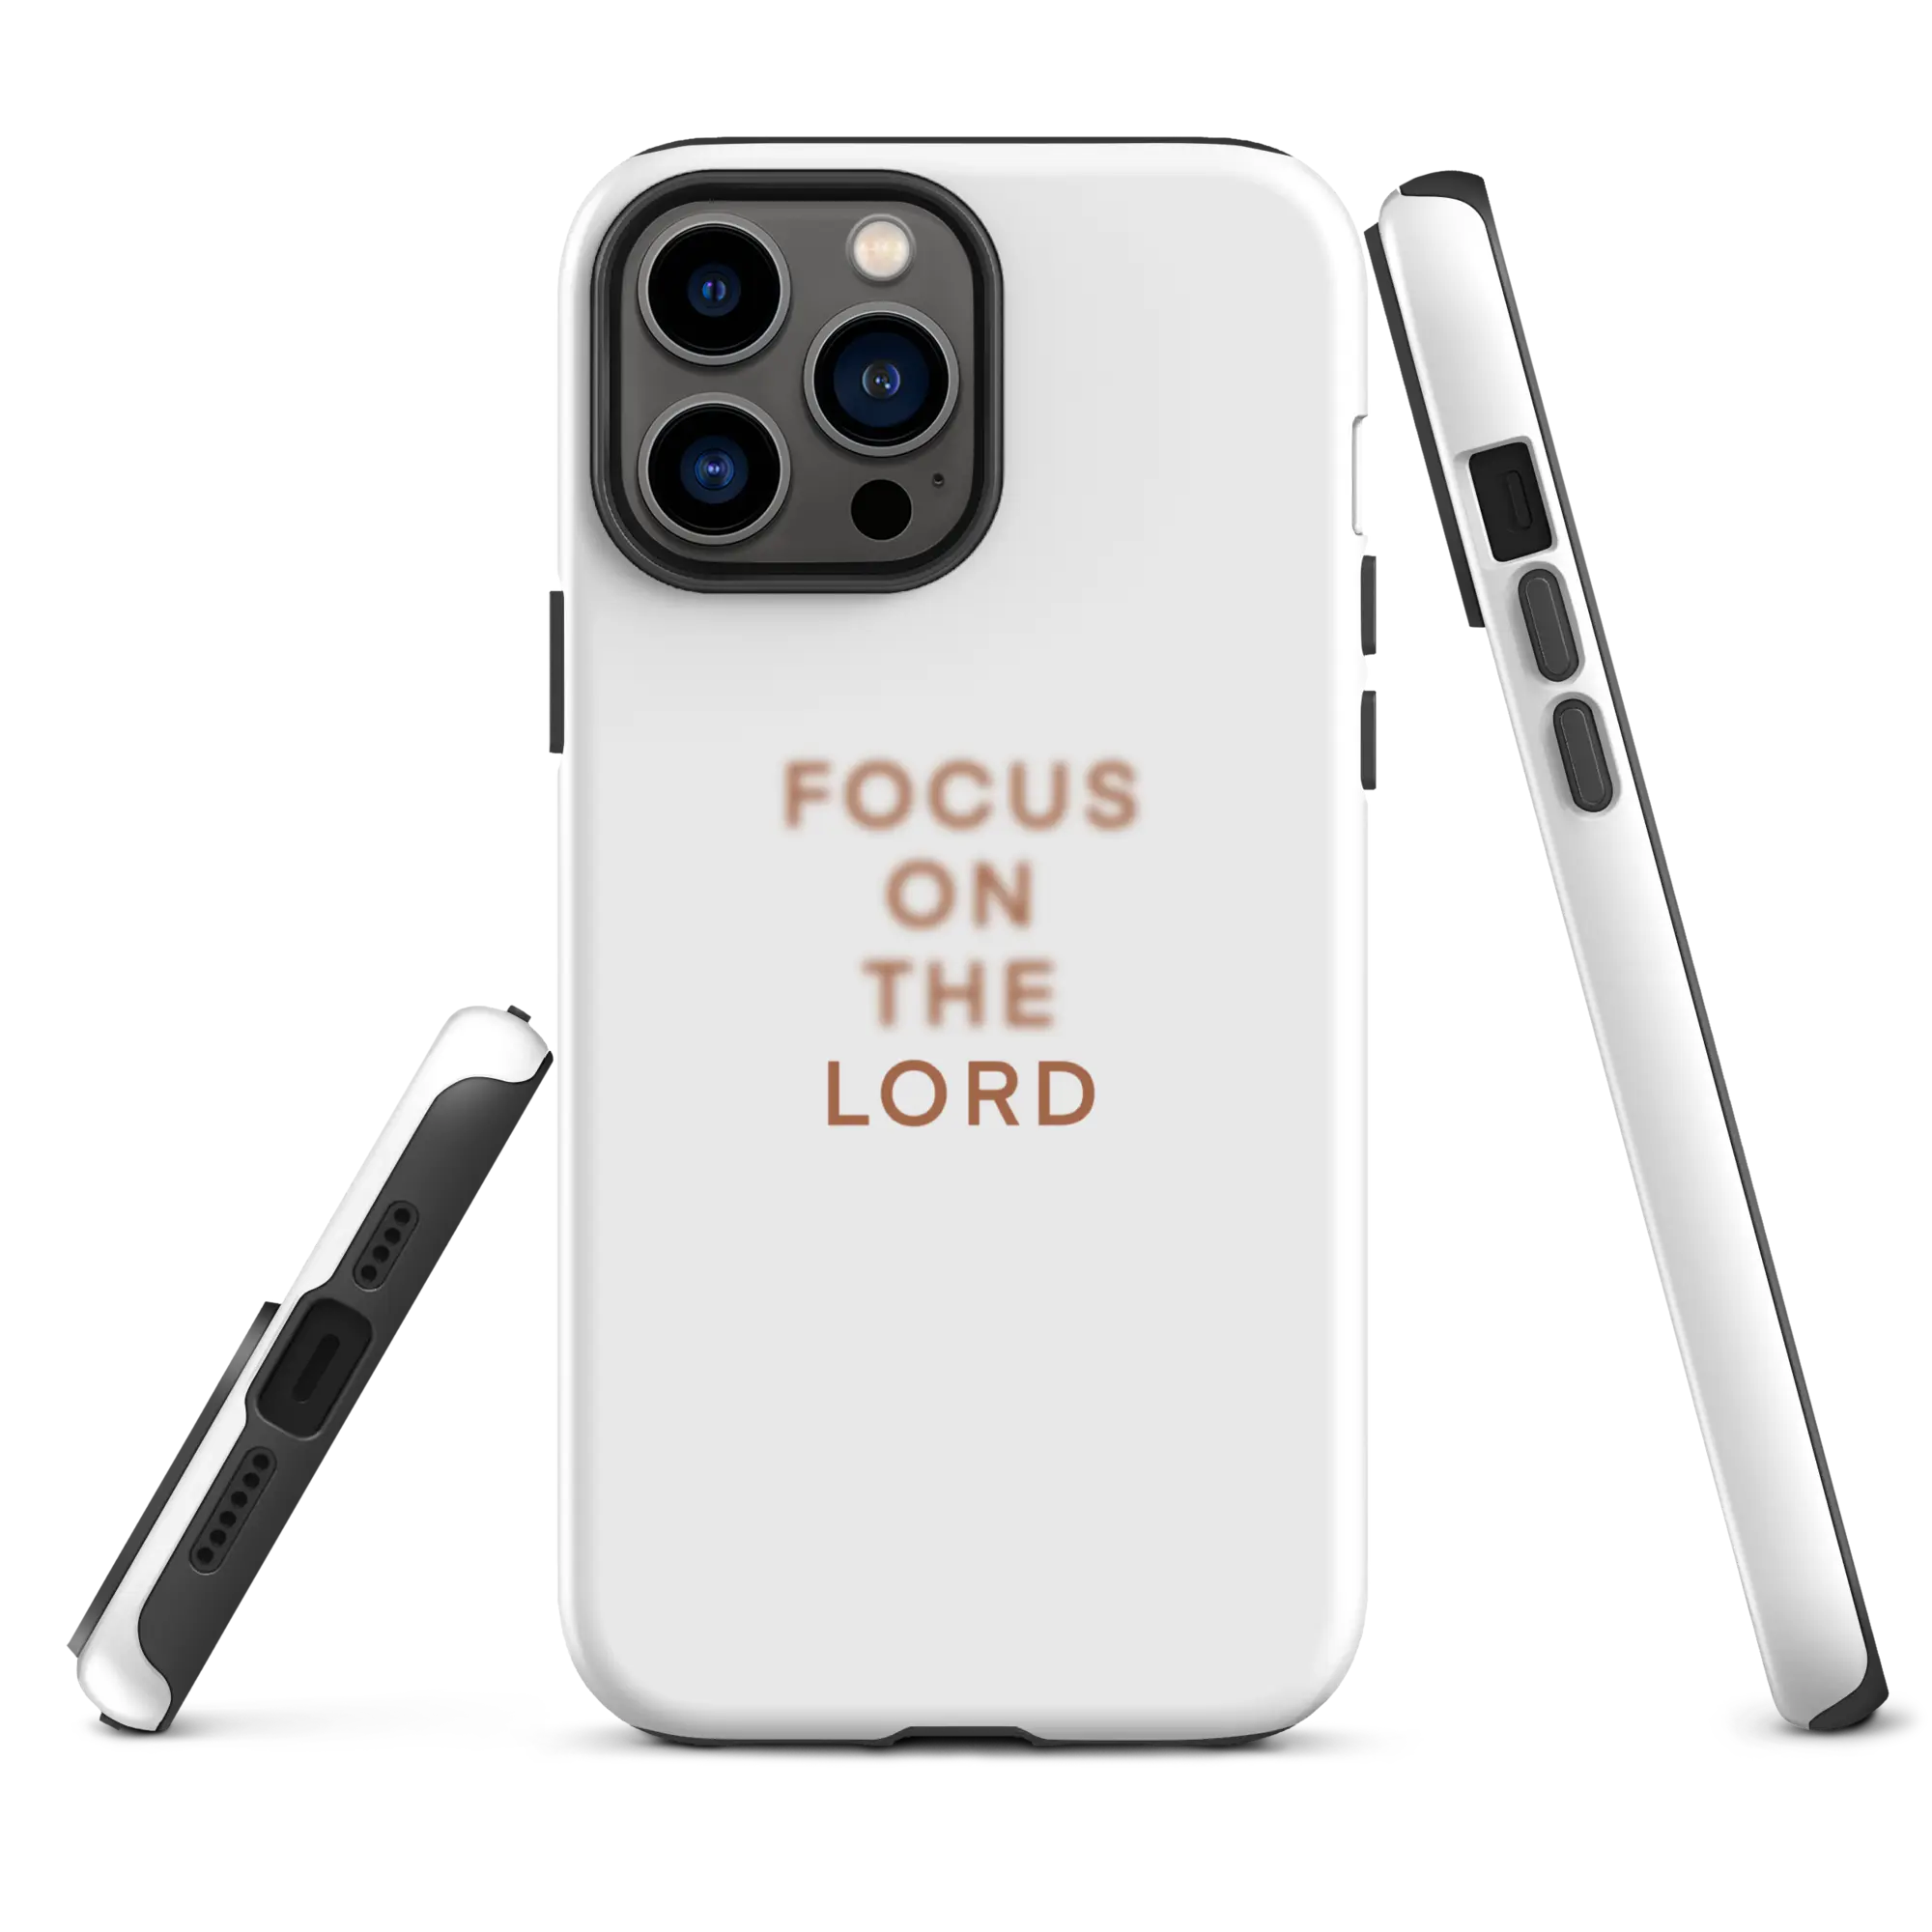 Minimalist design iPhone case with 'FOCUS ON THE LORD' inscription, combining simplicity with spiritual devotion.